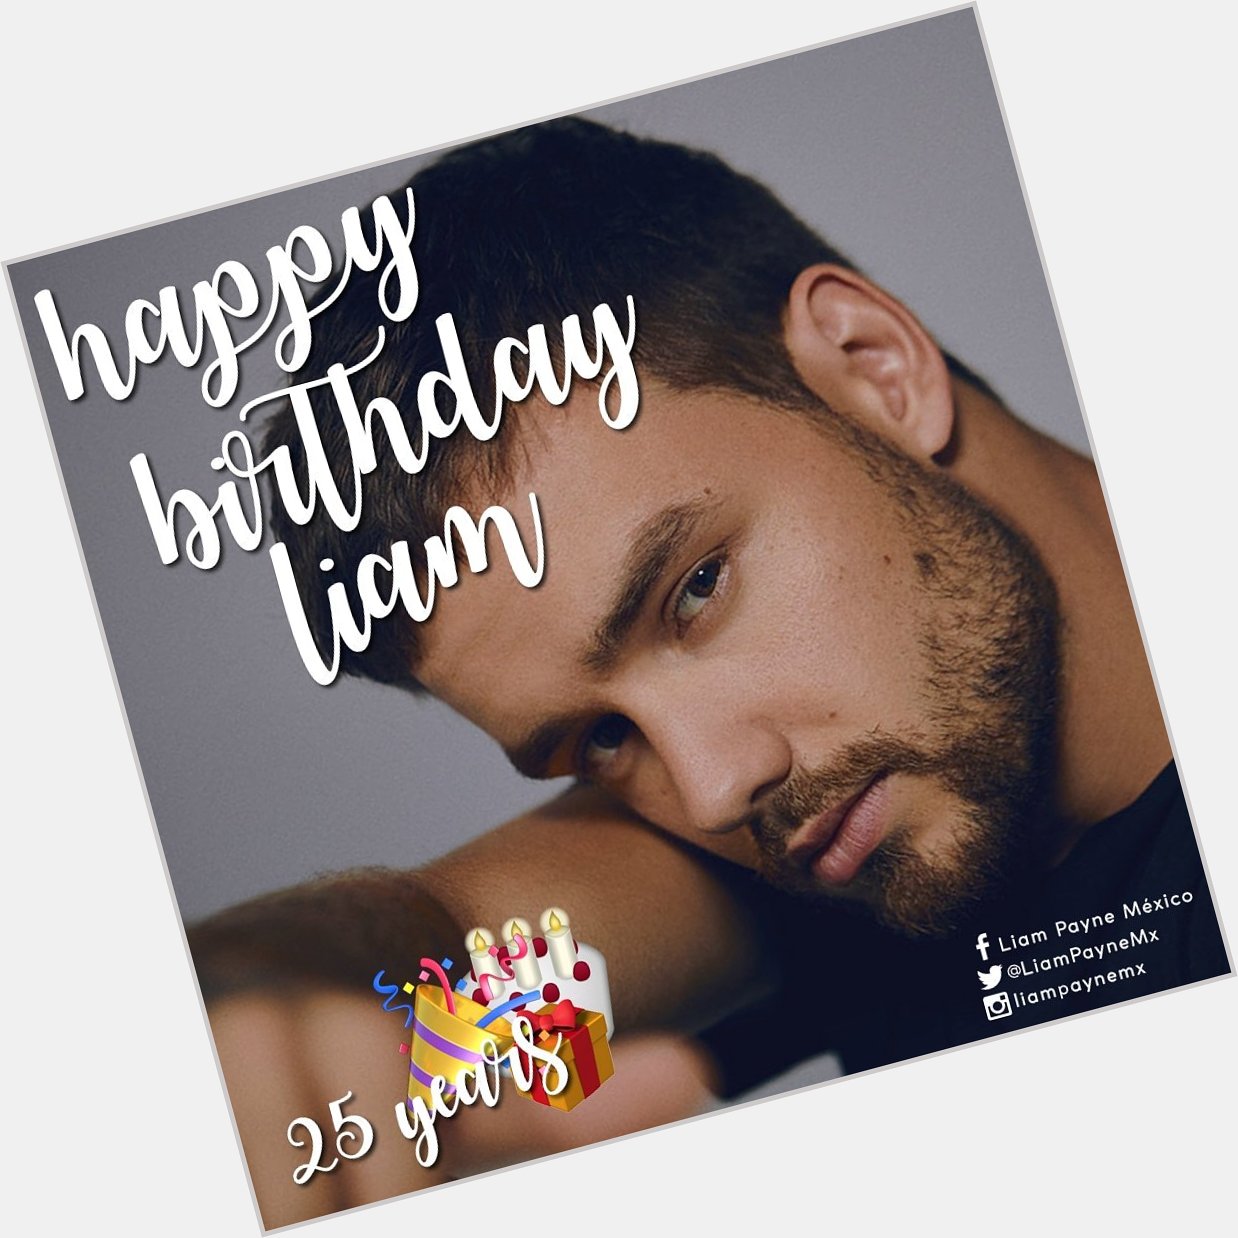 Happy birthday from Liam Payne Mexico and your mexicans fans     